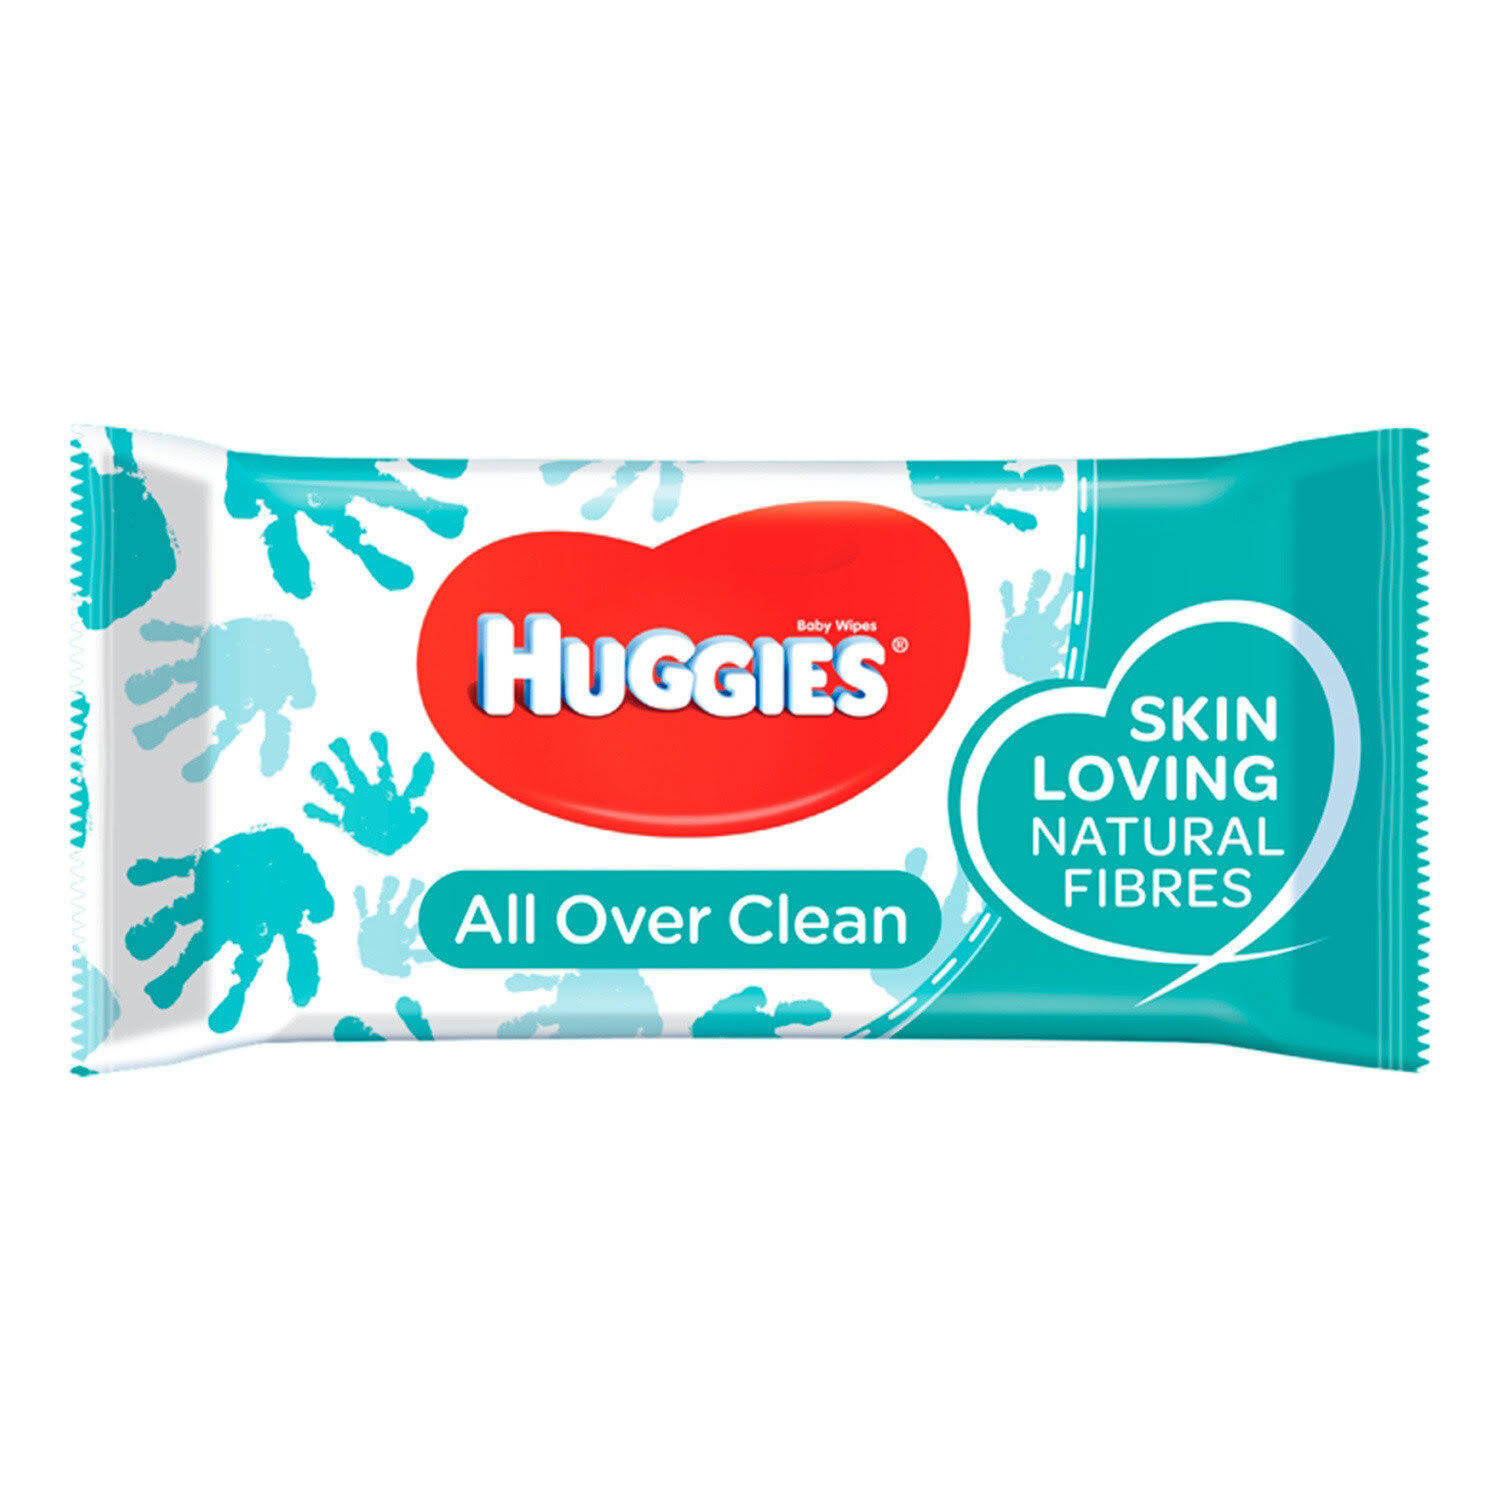 Huggies All Over Clean Baby Wipes - 56ct